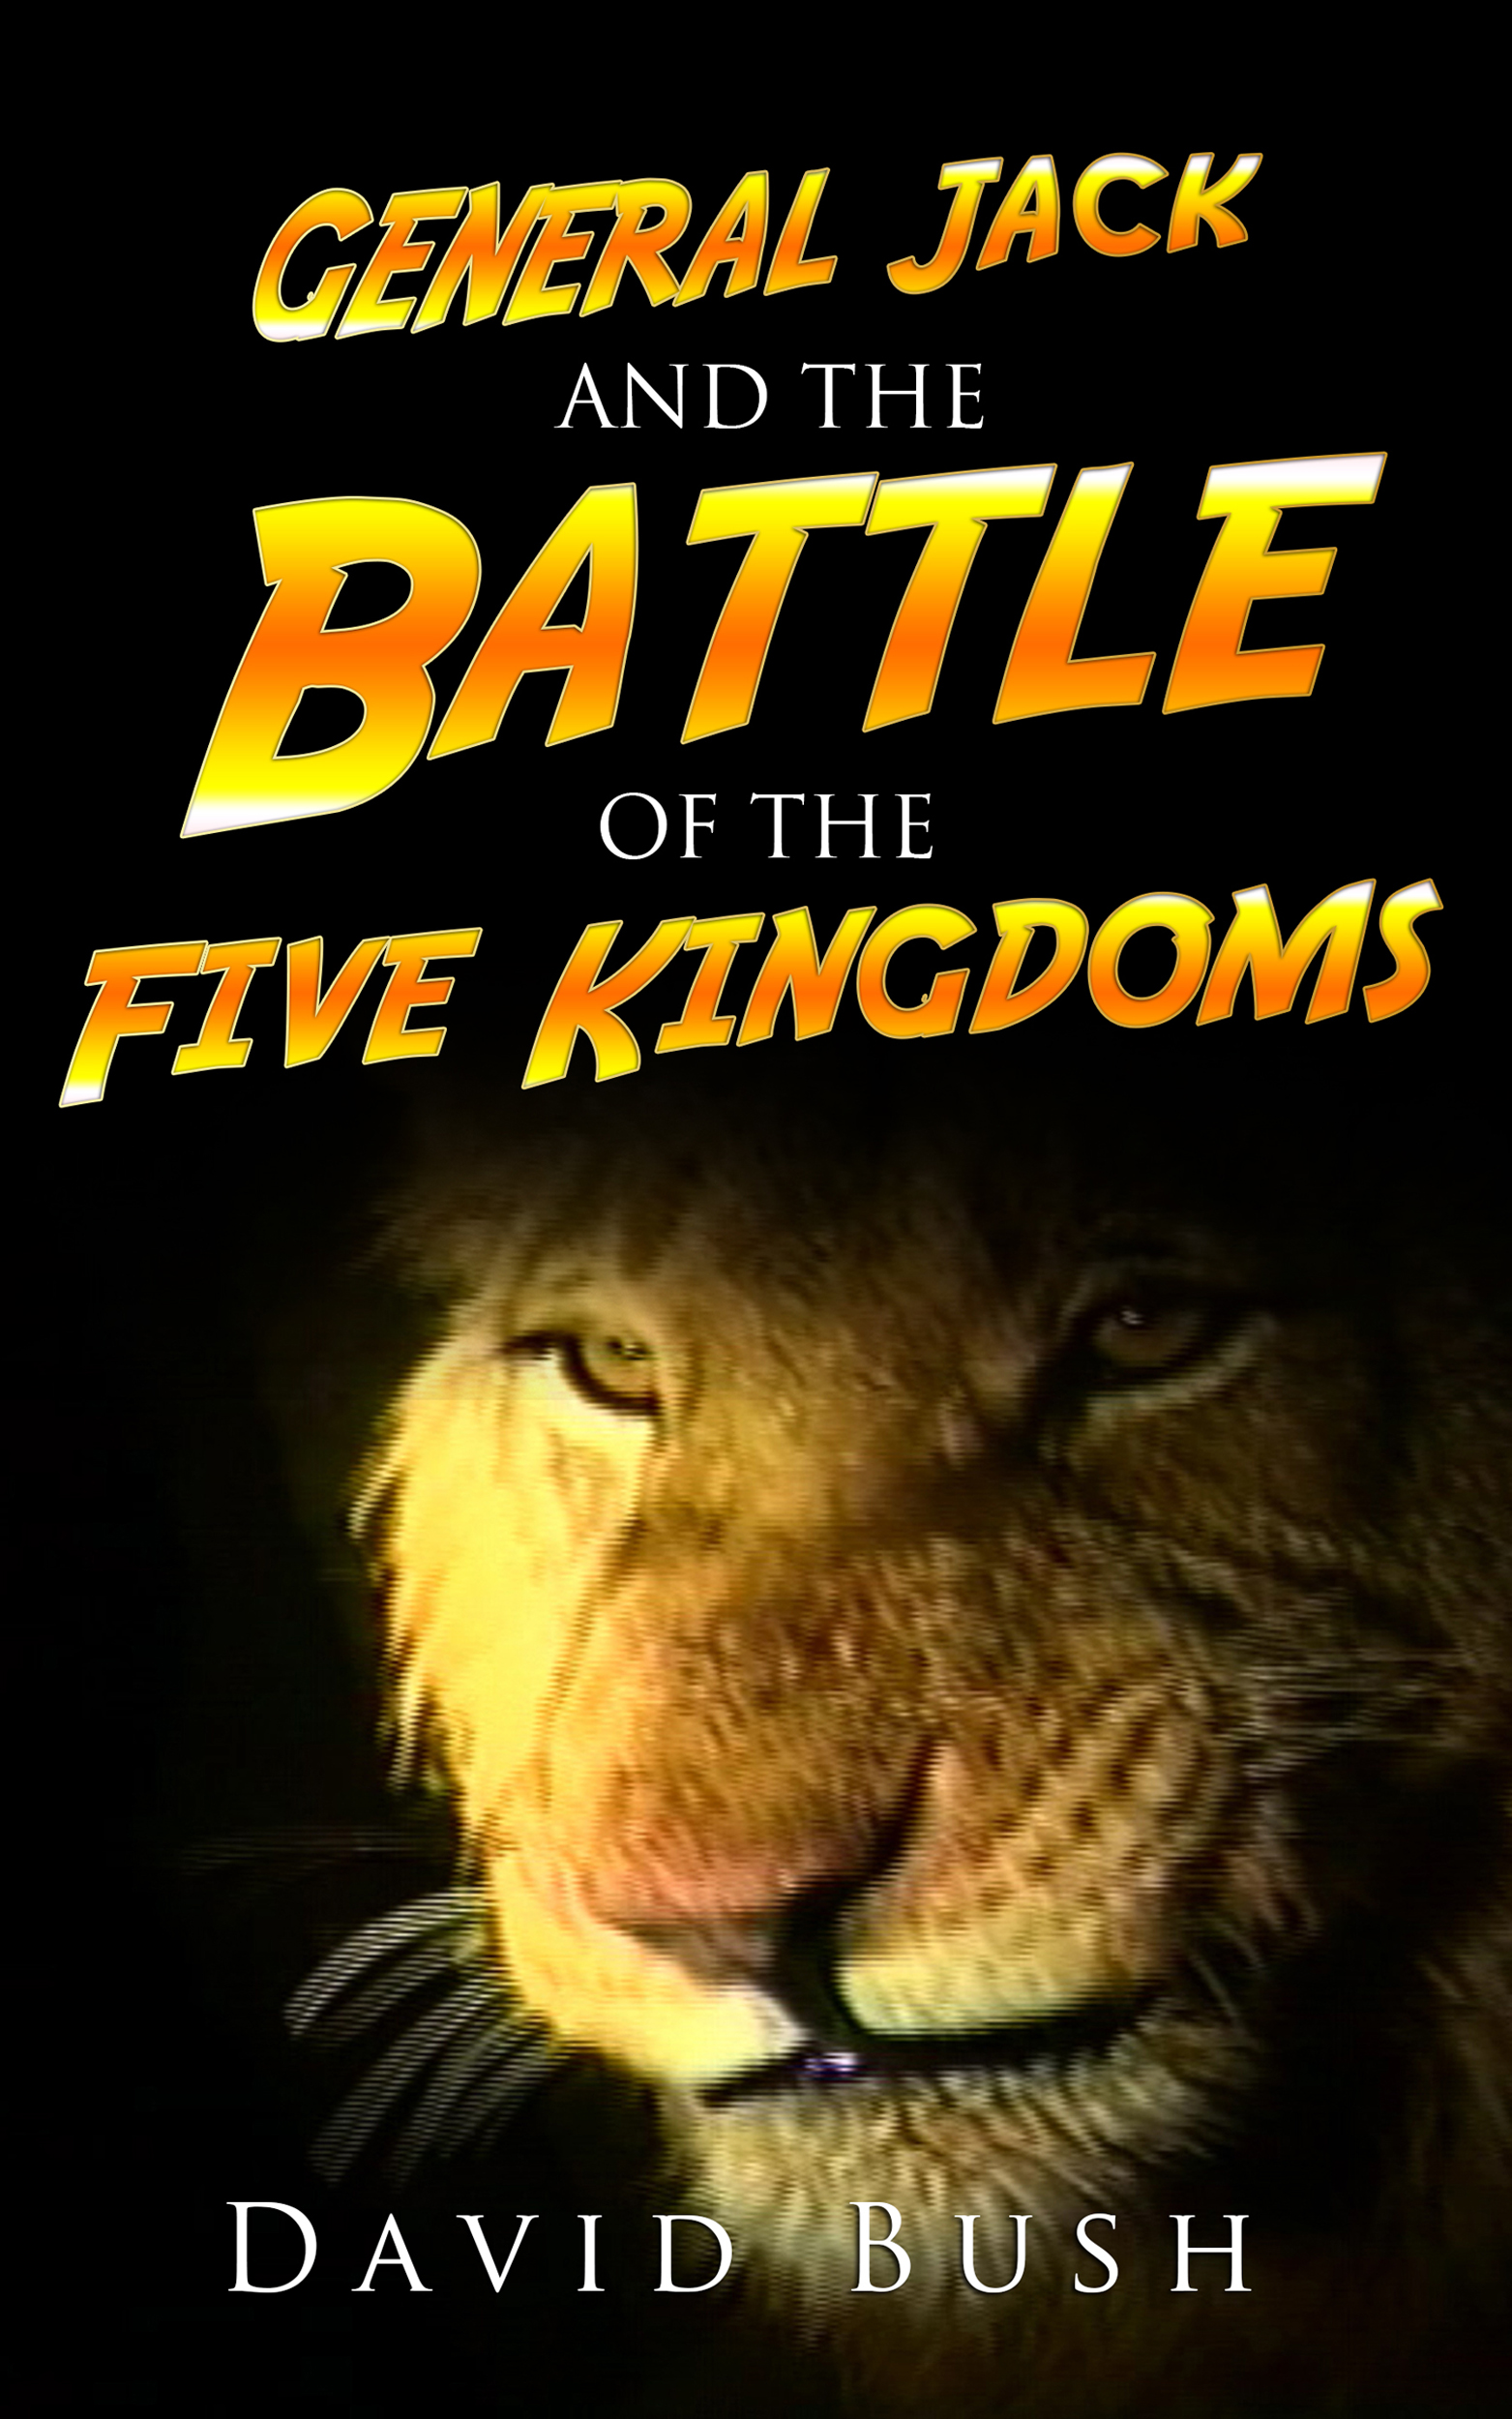 FREE: General Jack and the Battle of the Five Kingdoms by David Bush